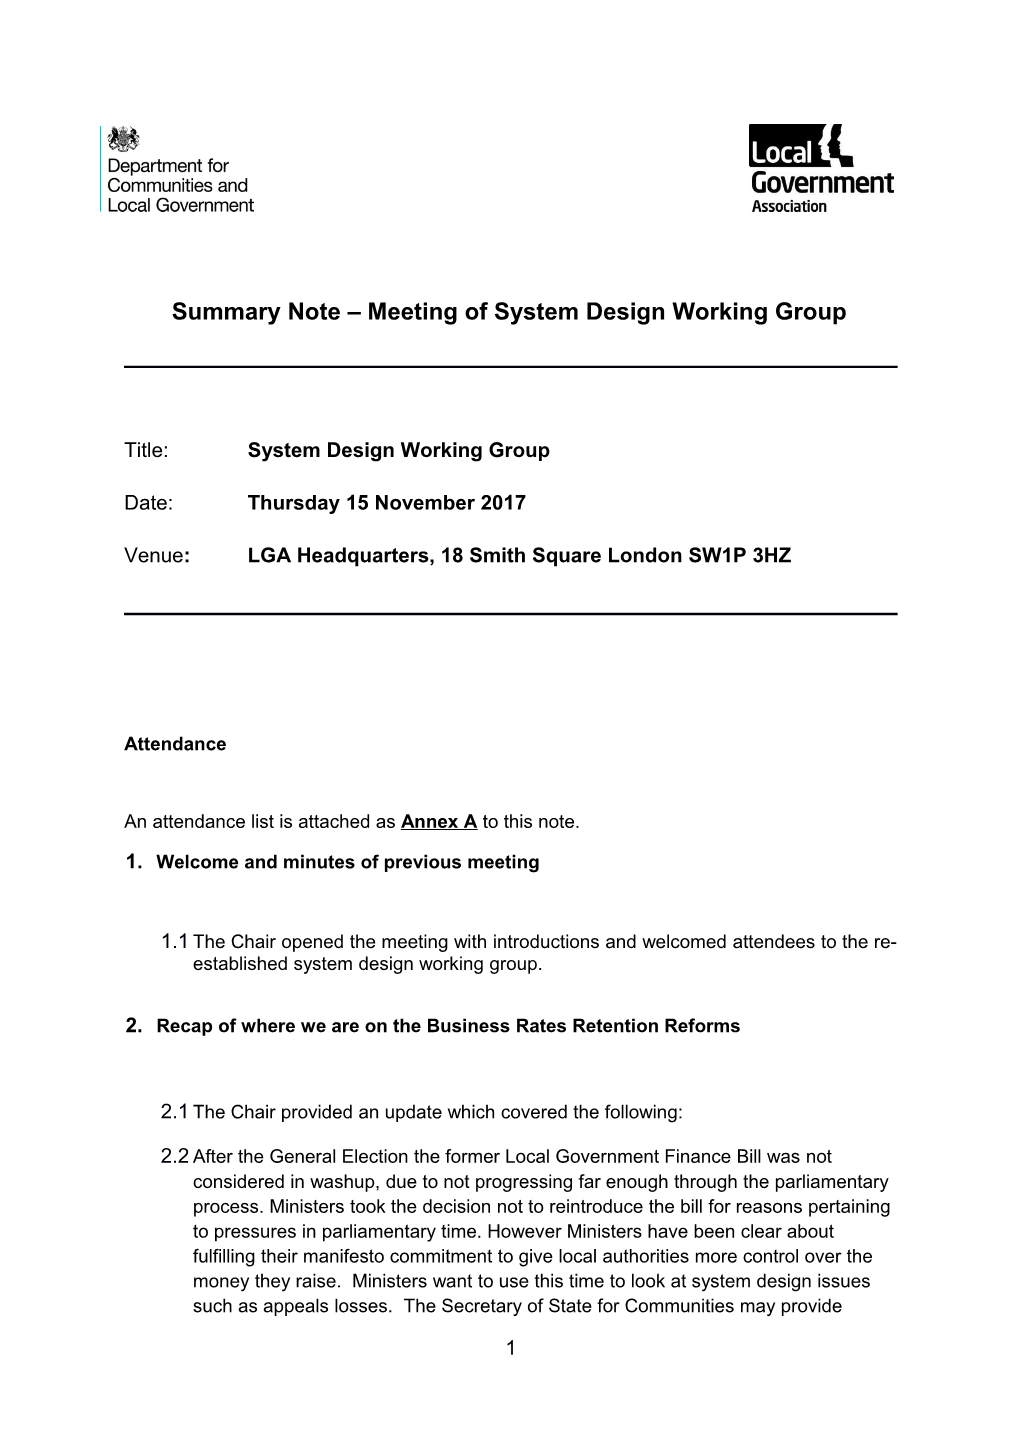 Summary Note Meeting of System Designworking Group